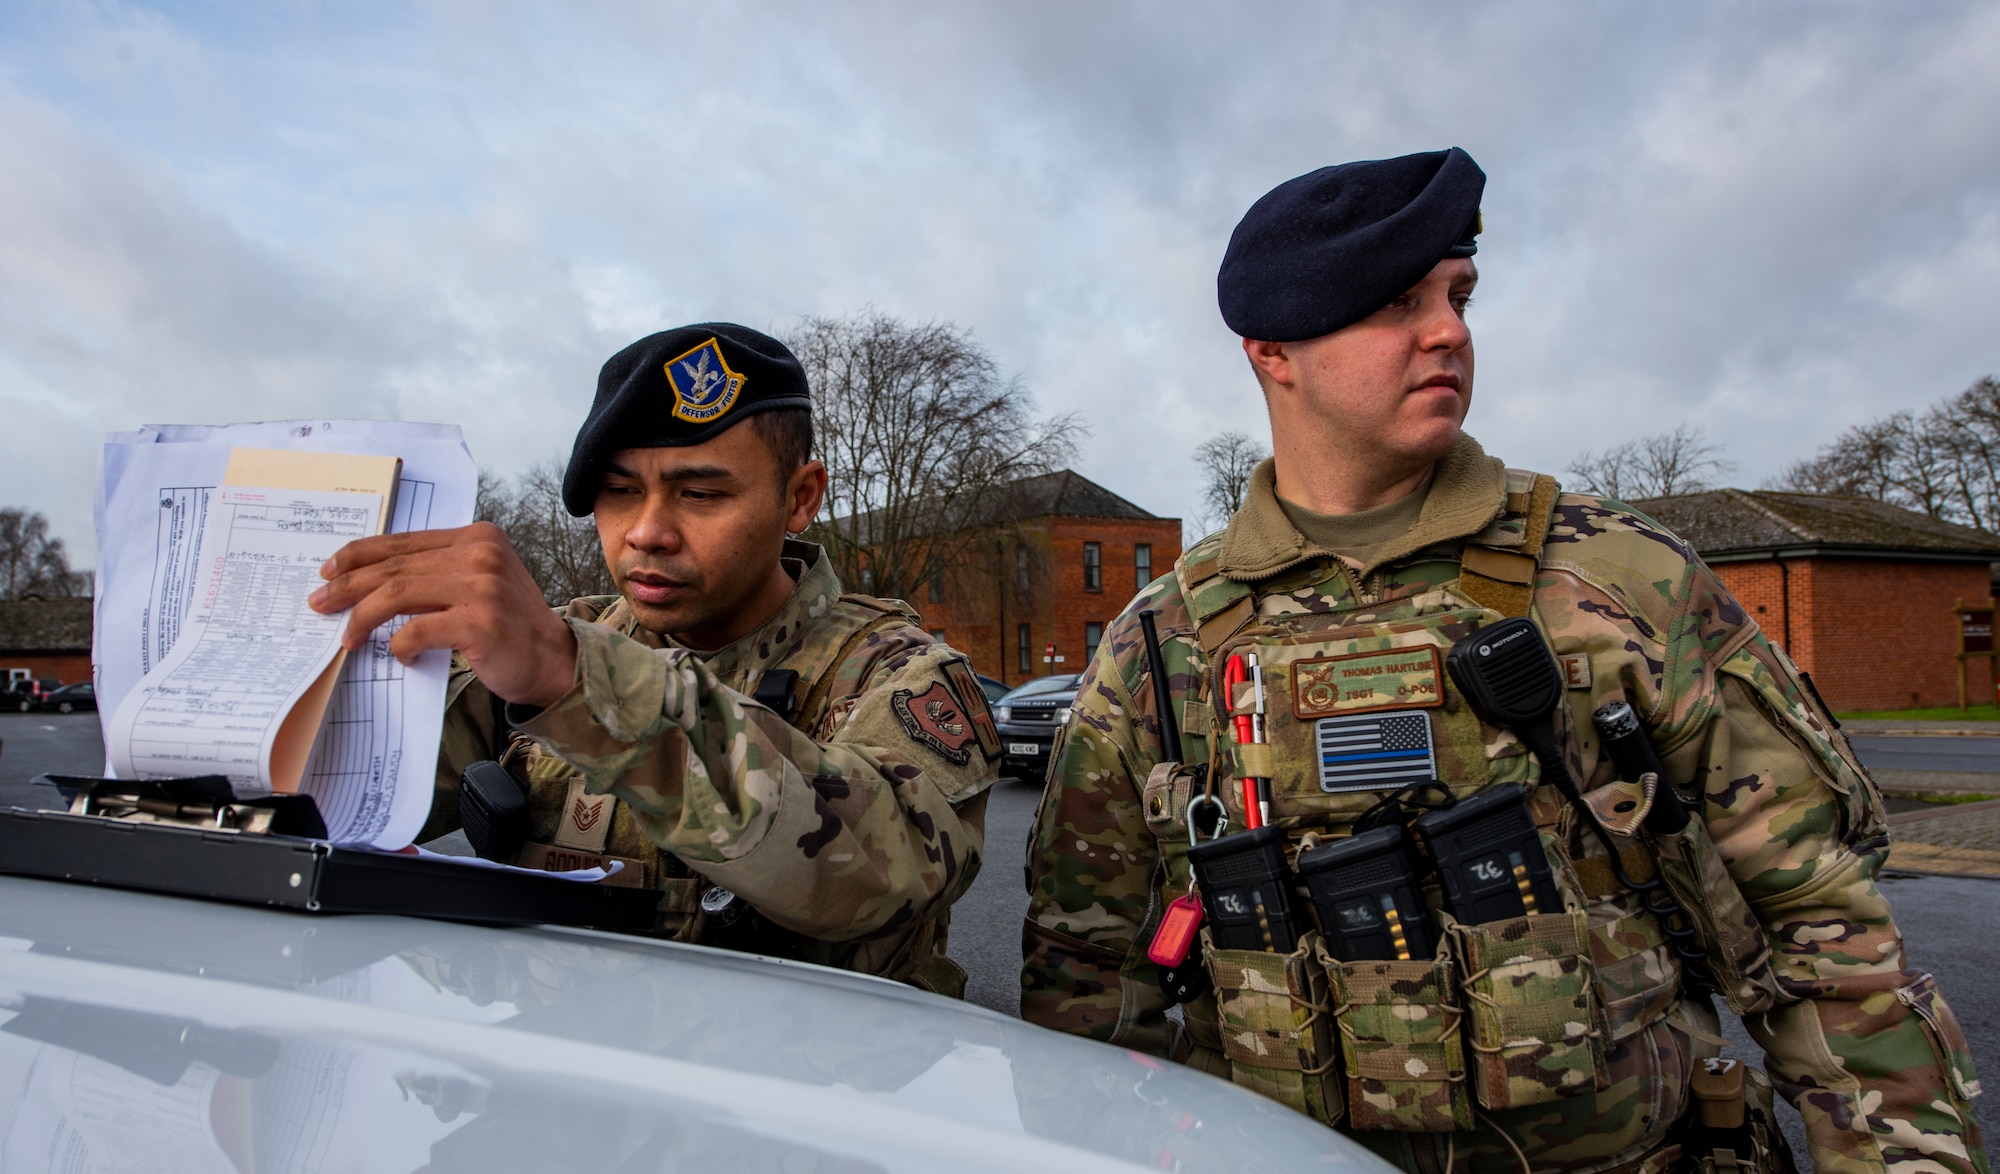 U.S. Air Force Tech. Sgt. Randy Roquid, left, and Tech. Sgt. Thomas Hartline, right, 100th Security Forces Squadron flight sergeants, prepare to issue parking violations on Royal Air Force Mildenhall, England, Feb. 16, 2022. By strictly enforcing the use of legal parking spaces, members of the 100th SFS ensure emergency vehicles are able get where they need to be in a moment’s notice. (U.S. Air Force photo by Senior Airman Kevin Long)